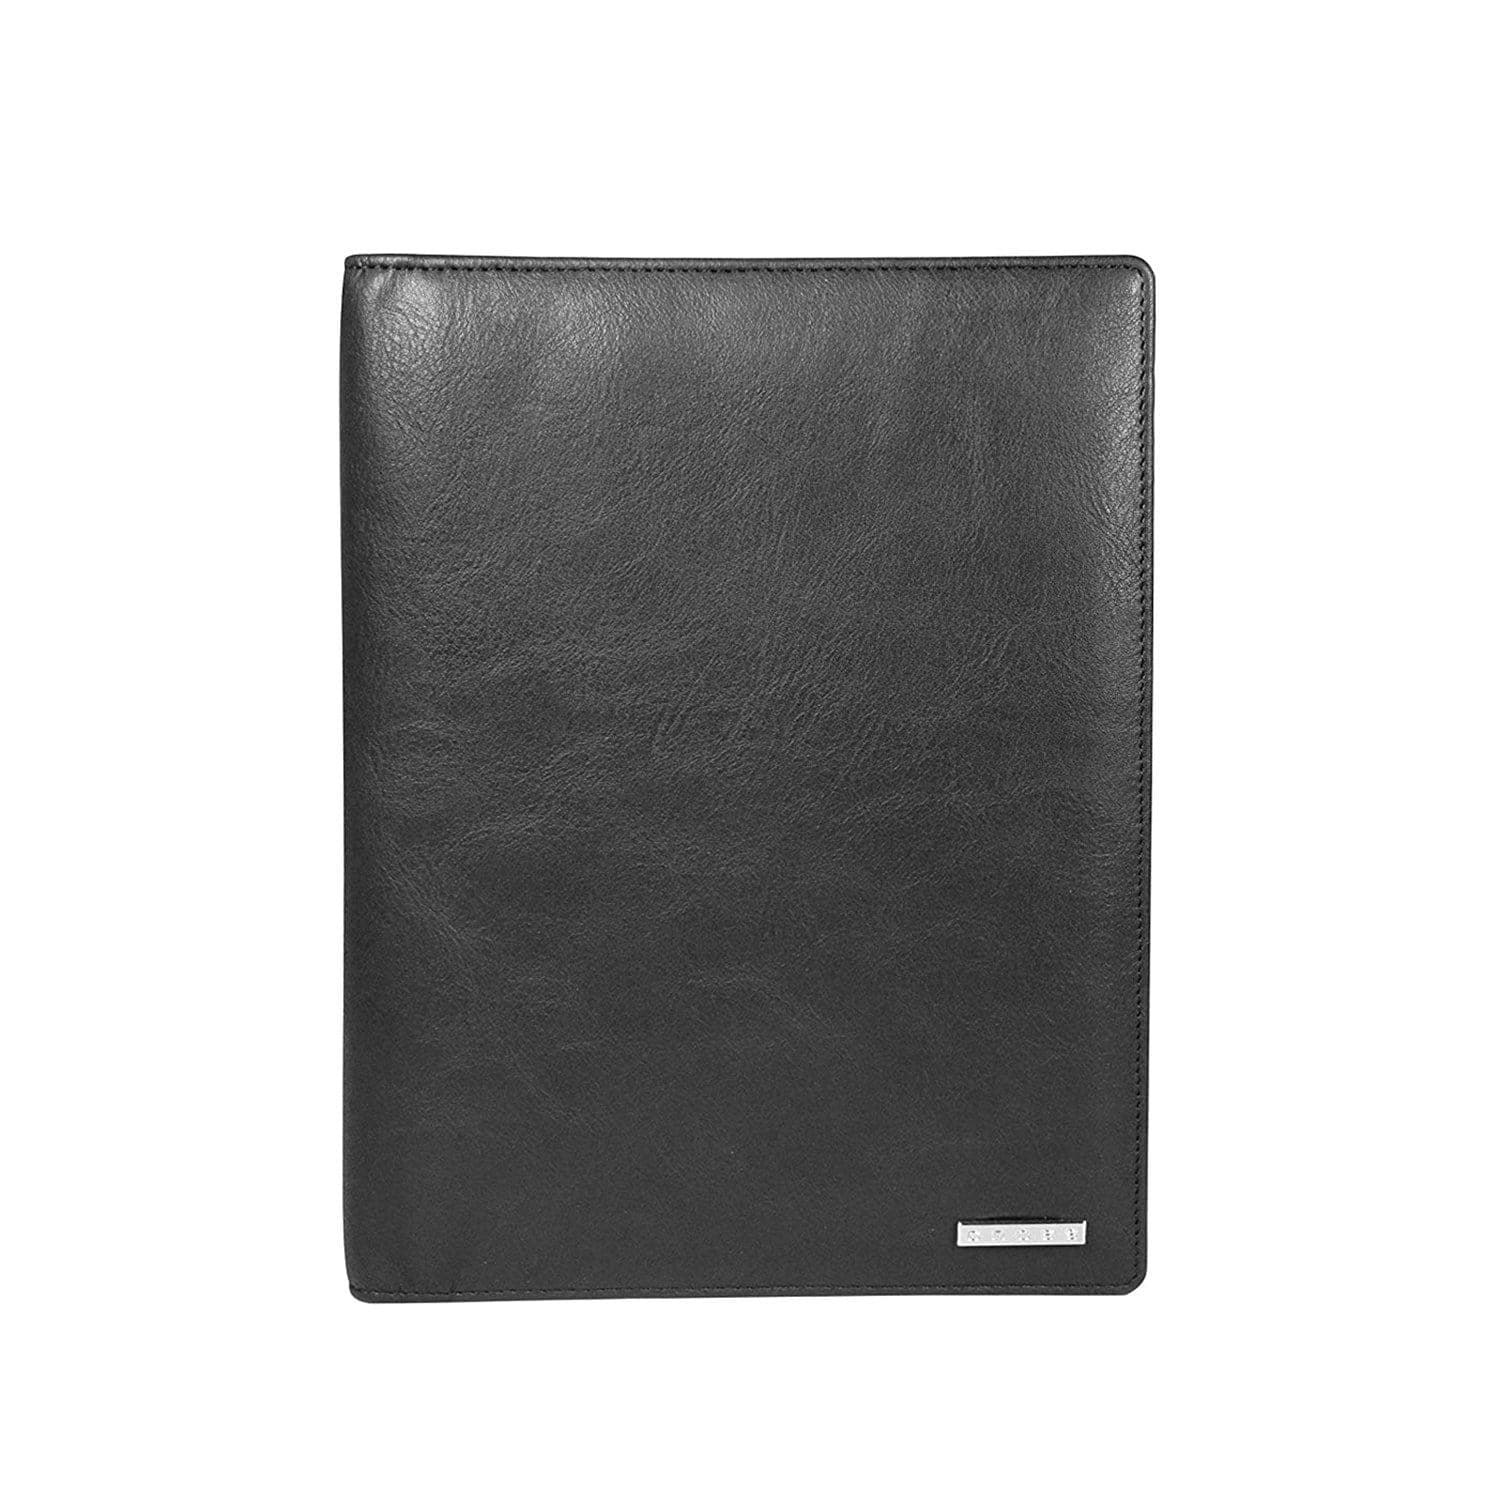 Cross Insignia Express A5 Size Leather Planner with Cross Agenda Pen  - Black - AC1268329-2-1 - Jashanmal Home